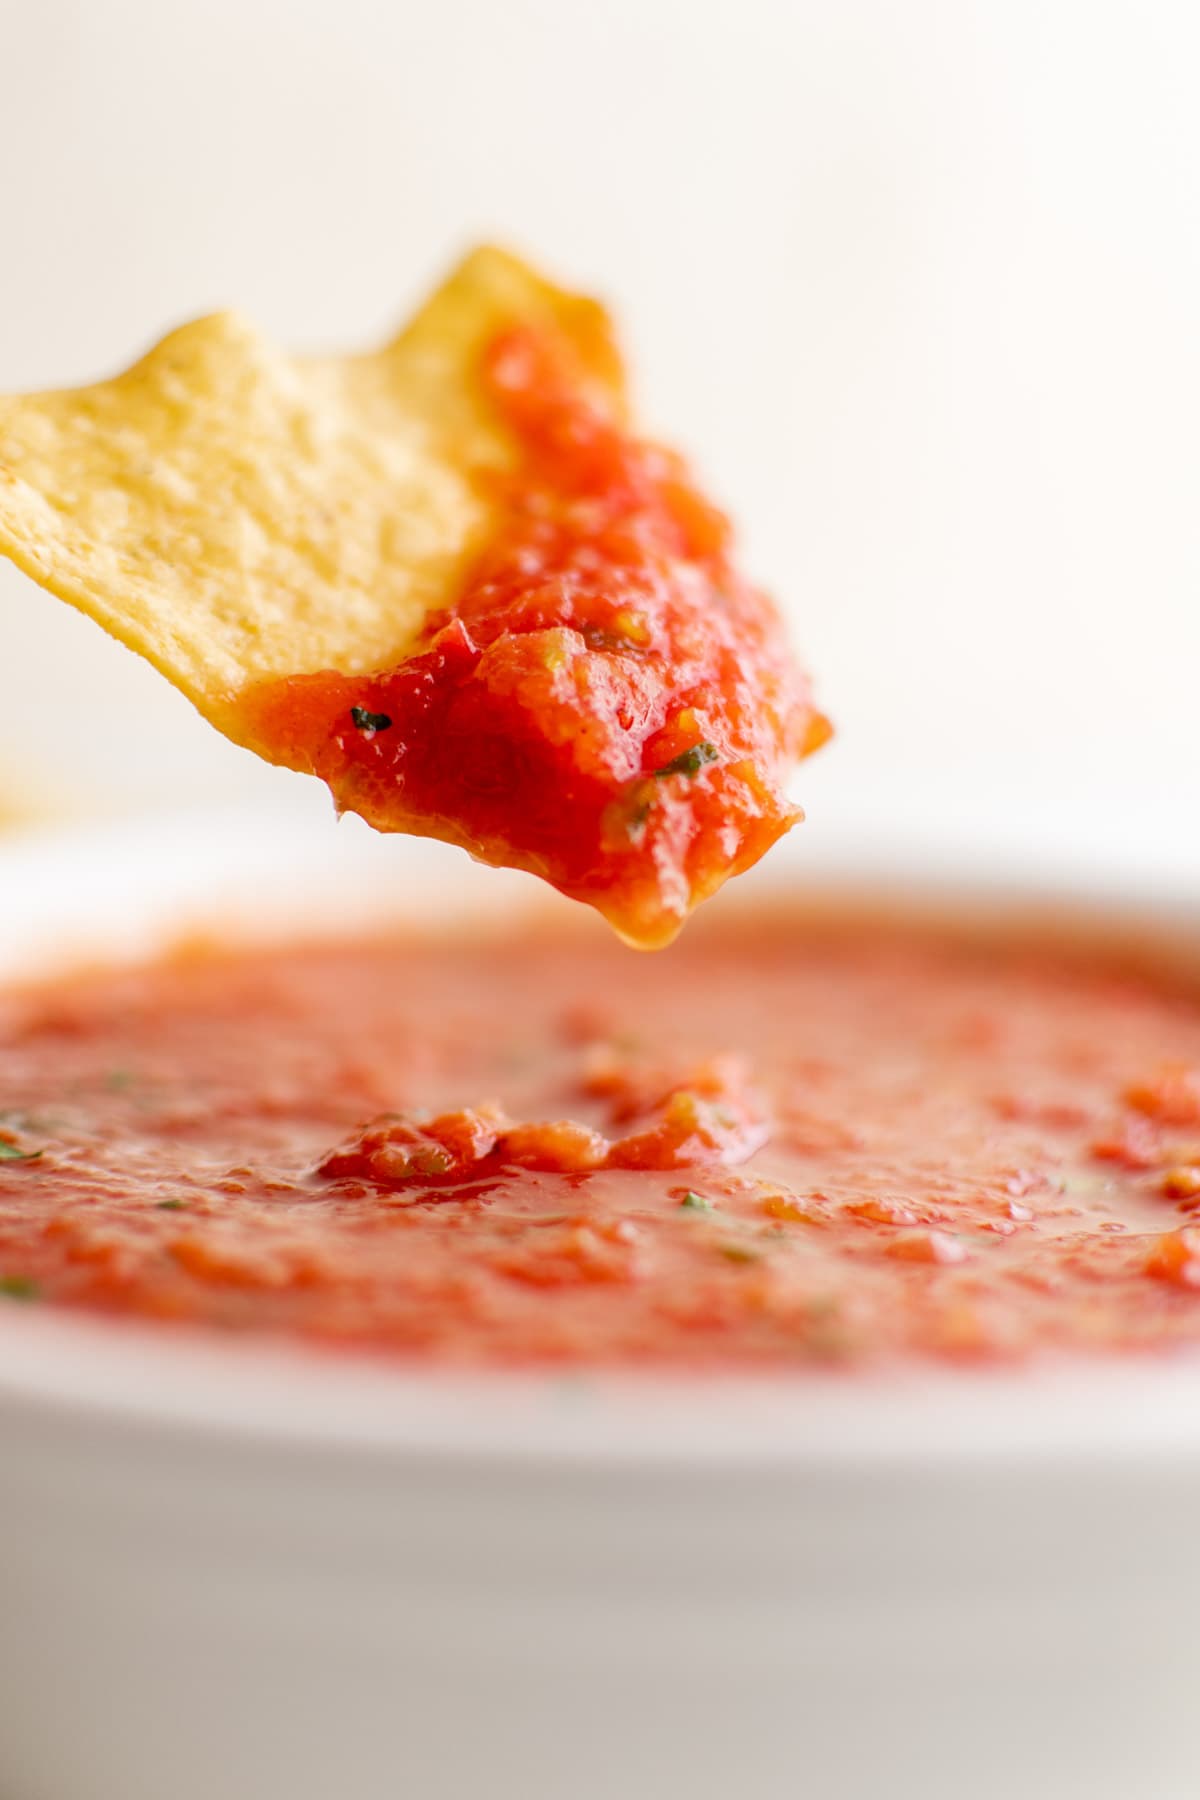 chip with salsa on it, bowl of restaurant style salsa